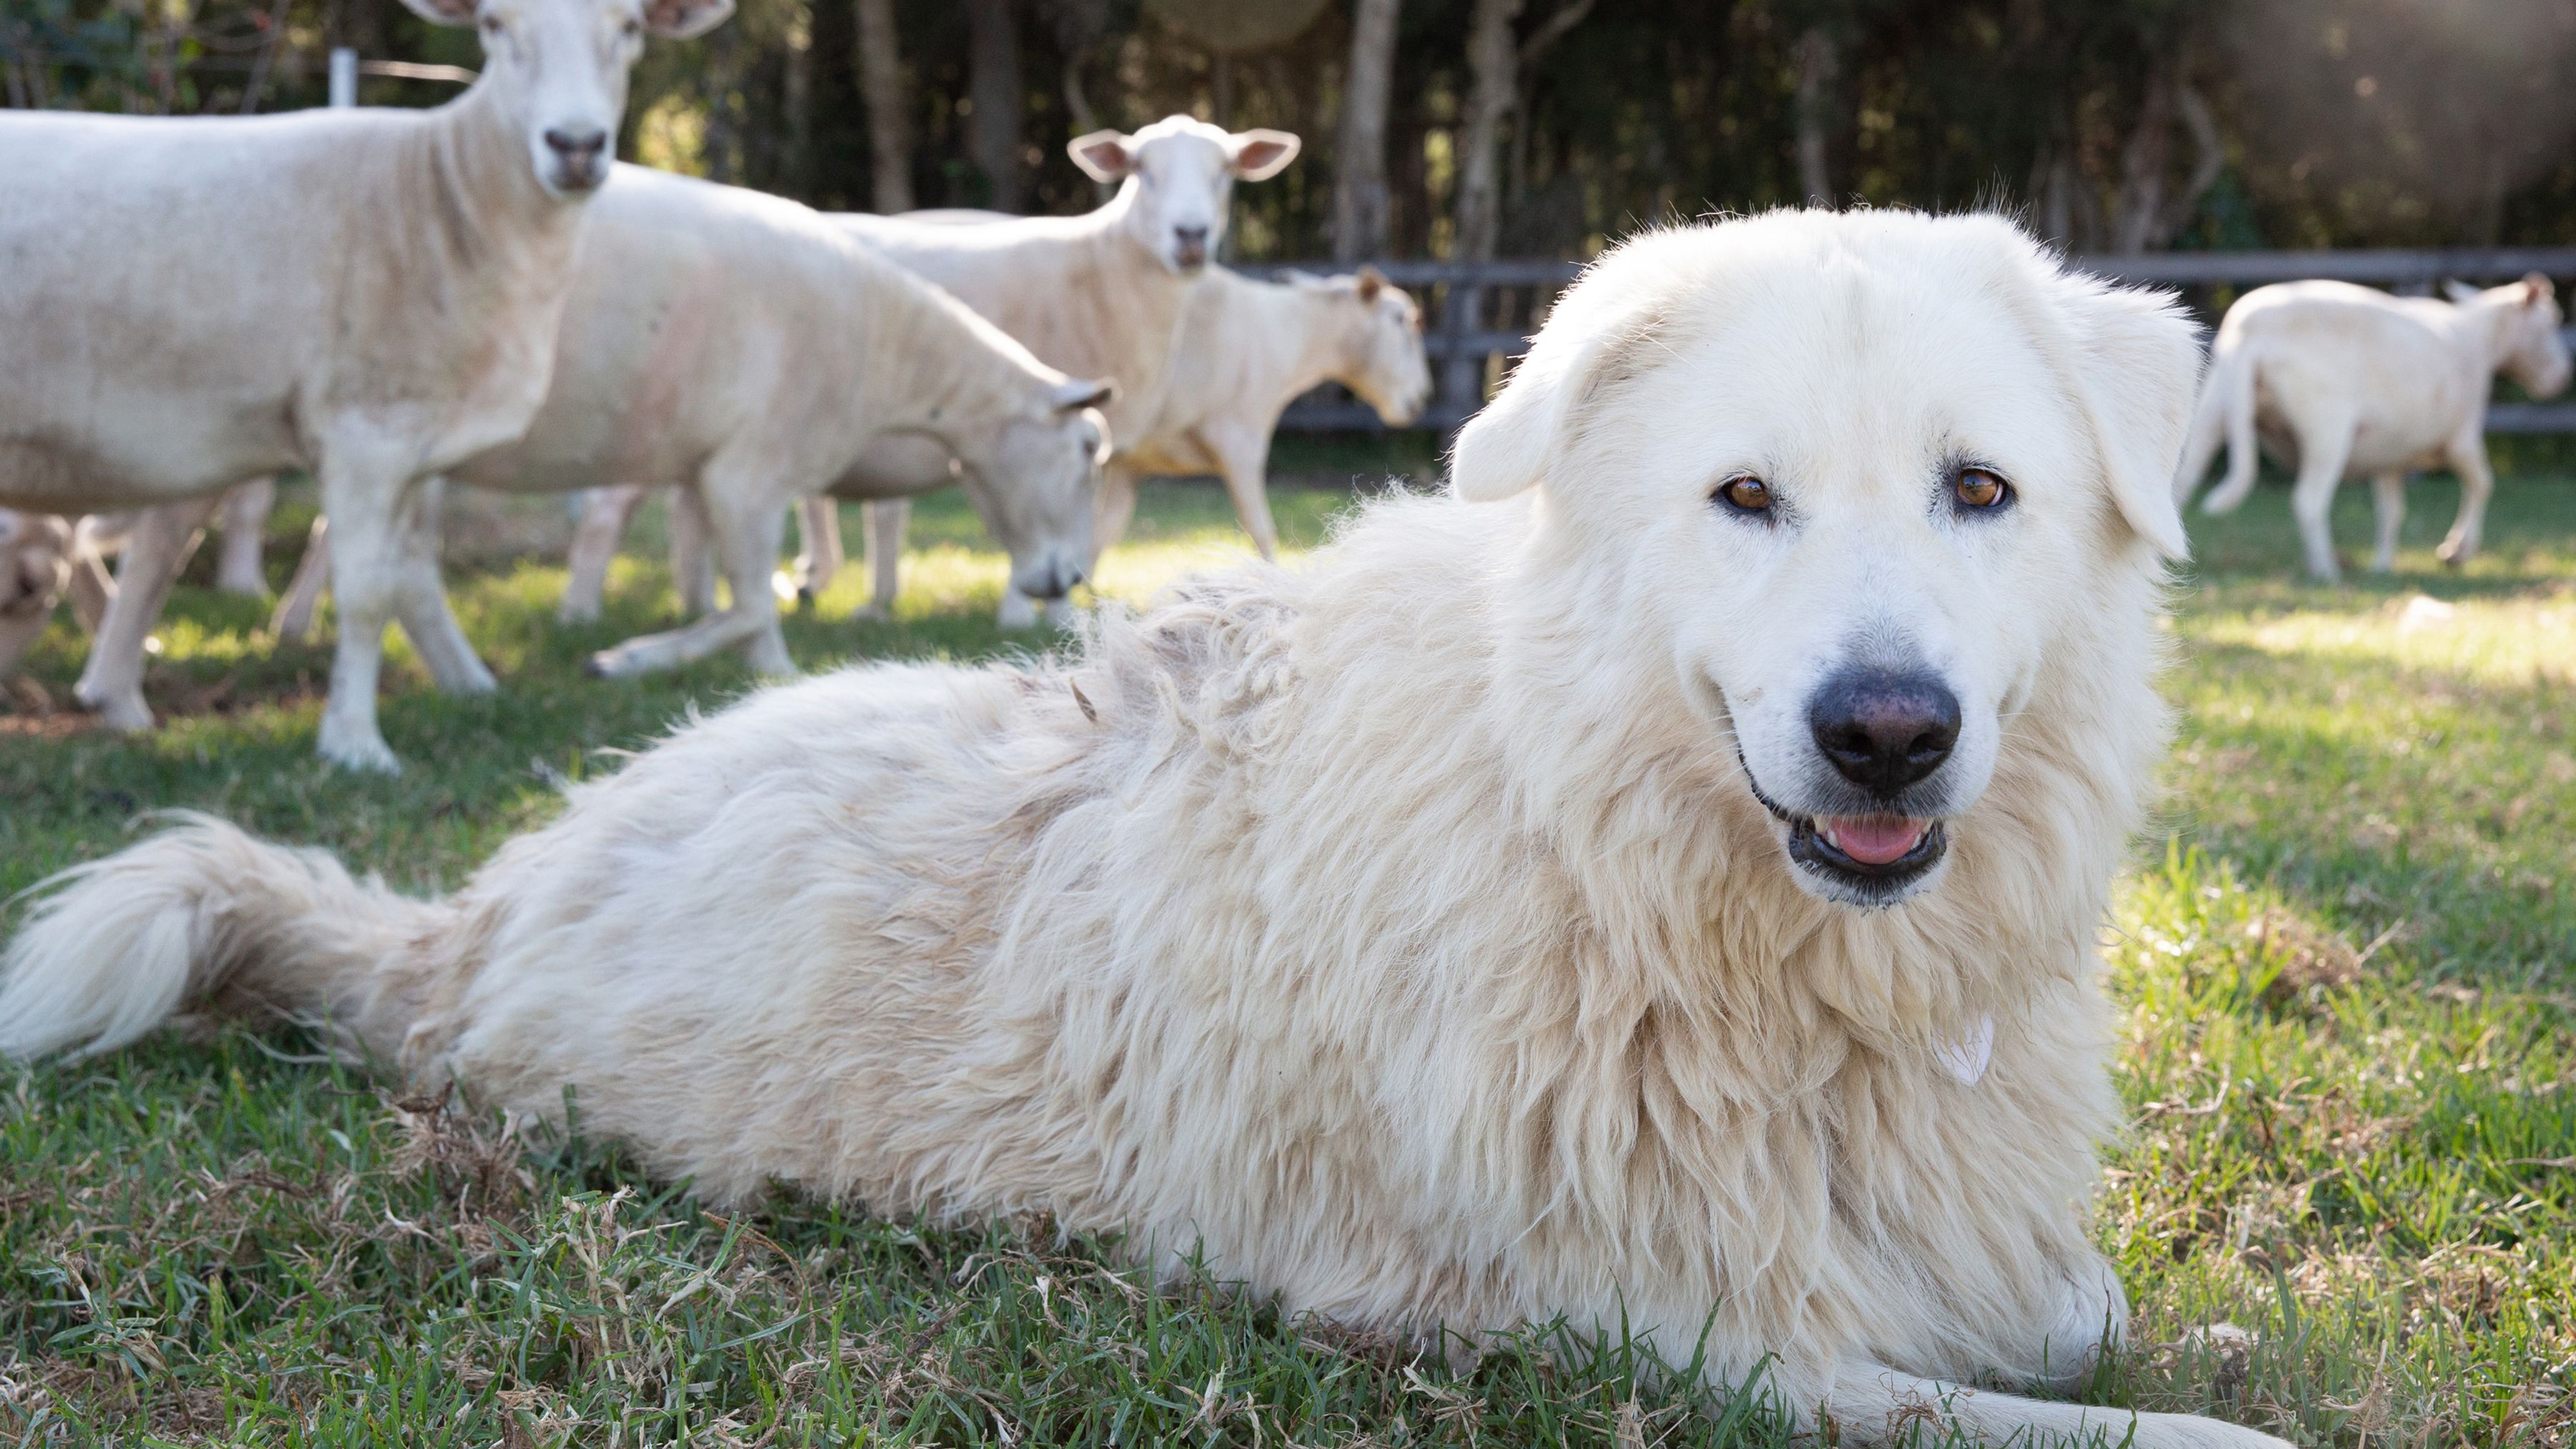 10 Best Dog Breeds for Farms